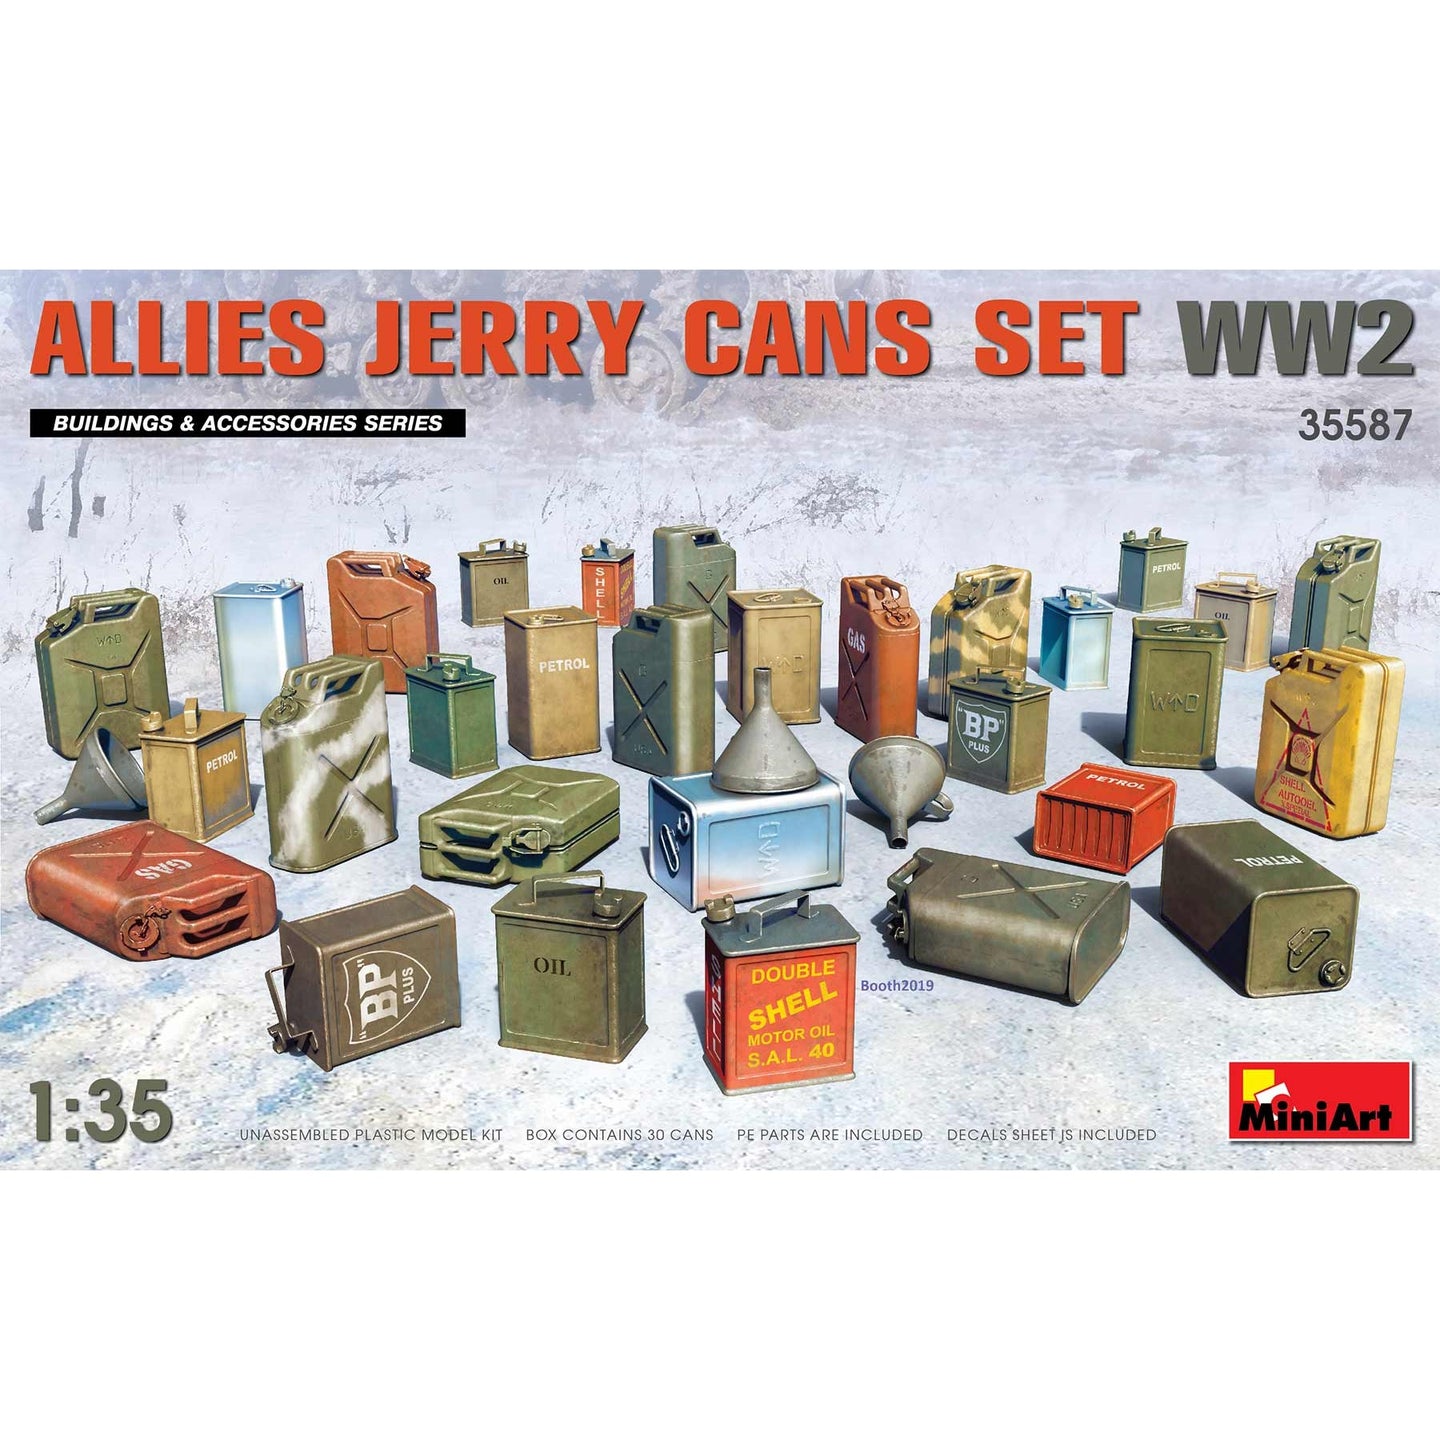 MiniArt 1/35 Allied Jerry Cans Set WWII 35587